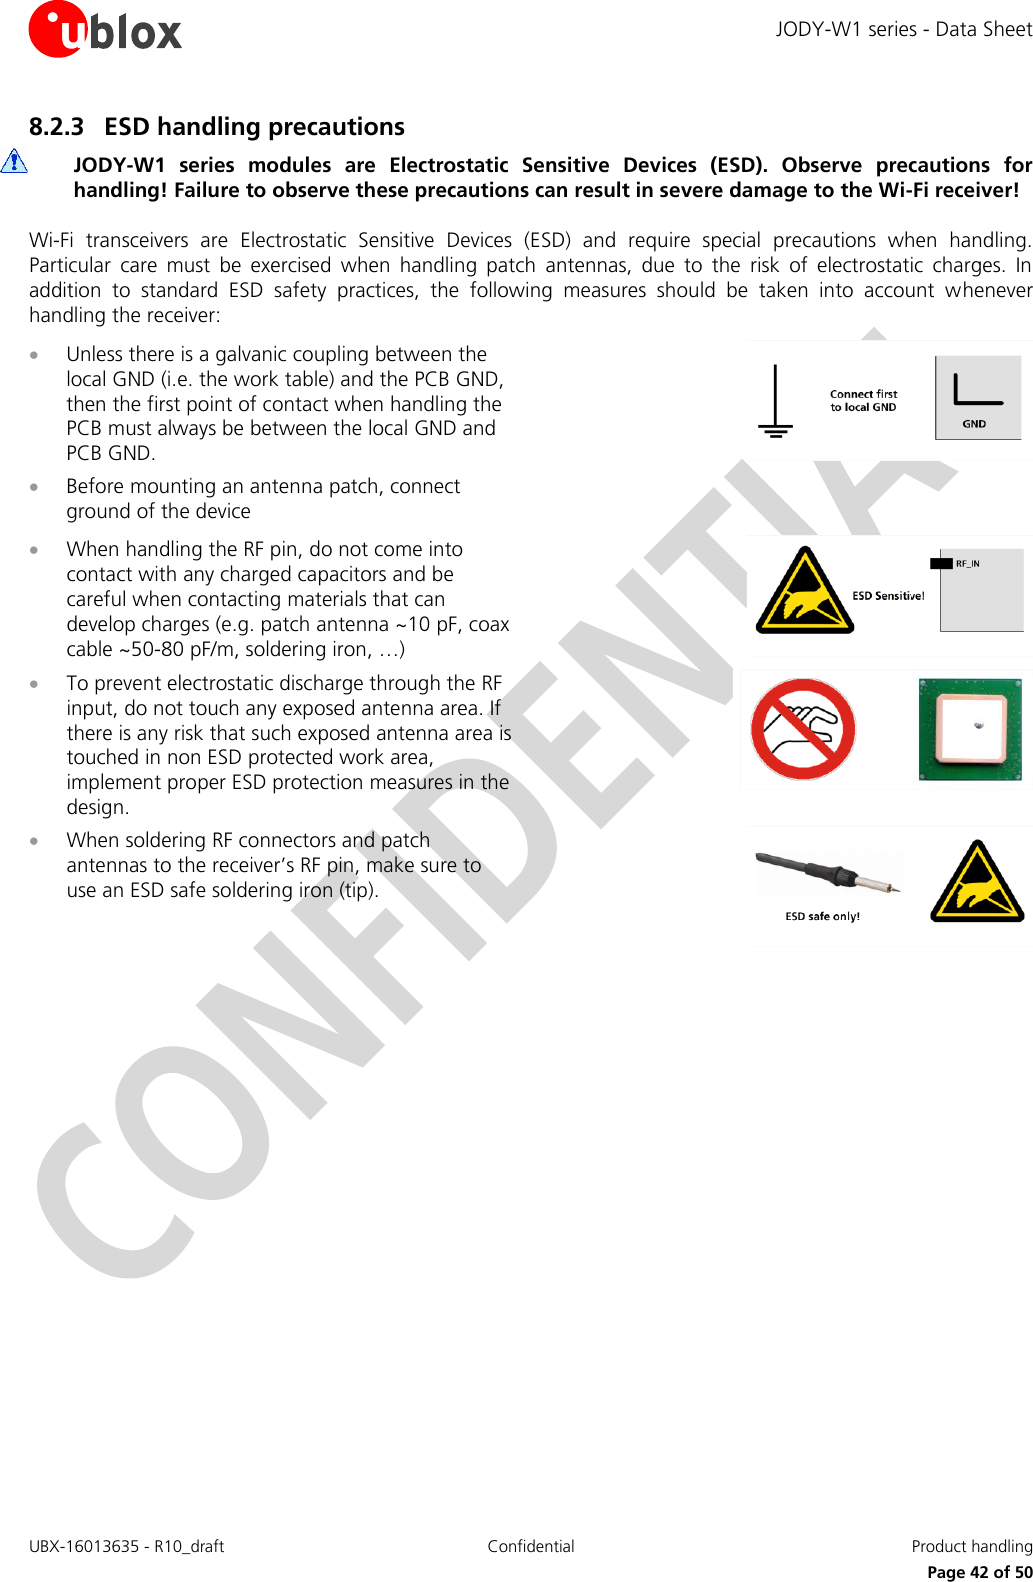 JODY-W1 series - Data Sheet UBX-16013635 - R10_draft Confidential  Product handling     Page 42 of 50 8.2.3 ESD handling precautions  JODY-W1  series  modules  are  Electrostatic  Sensitive  Devices  (ESD).  Observe  precautions  for handling! Failure to observe these precautions can result in severe damage to the Wi-Fi receiver! Wi-Fi  transceivers  are  Electrostatic  Sensitive  Devices  (ESD)  and  require  special  precautions  when  handling. Particular  care  must  be  exercised  when  handling  patch  antennas,  due  to  the  risk  of  electrostatic  charges.  In addition  to  standard  ESD  safety  practices,  the  following  measures  should  be  taken  into  account  whenever handling the receiver:  Unless there is a galvanic coupling between the local GND (i.e. the work table) and the PCB GND, then the first point of contact when handling the PCB must always be between the local GND and PCB GND.  Before mounting an antenna patch, connect ground of the device   When handling the RF pin, do not come into contact with any charged capacitors and be careful when contacting materials that can develop charges (e.g. patch antenna ~10 pF, coax cable ~50-80 pF/m, soldering iron, …)   To prevent electrostatic discharge through the RF input, do not touch any exposed antenna area. If there is any risk that such exposed antenna area is touched in non ESD protected work area, implement proper ESD protection measures in the design.   When soldering RF connectors and patch antennas to the receiver’s RF pin, make sure to use an ESD safe soldering iron (tip).     